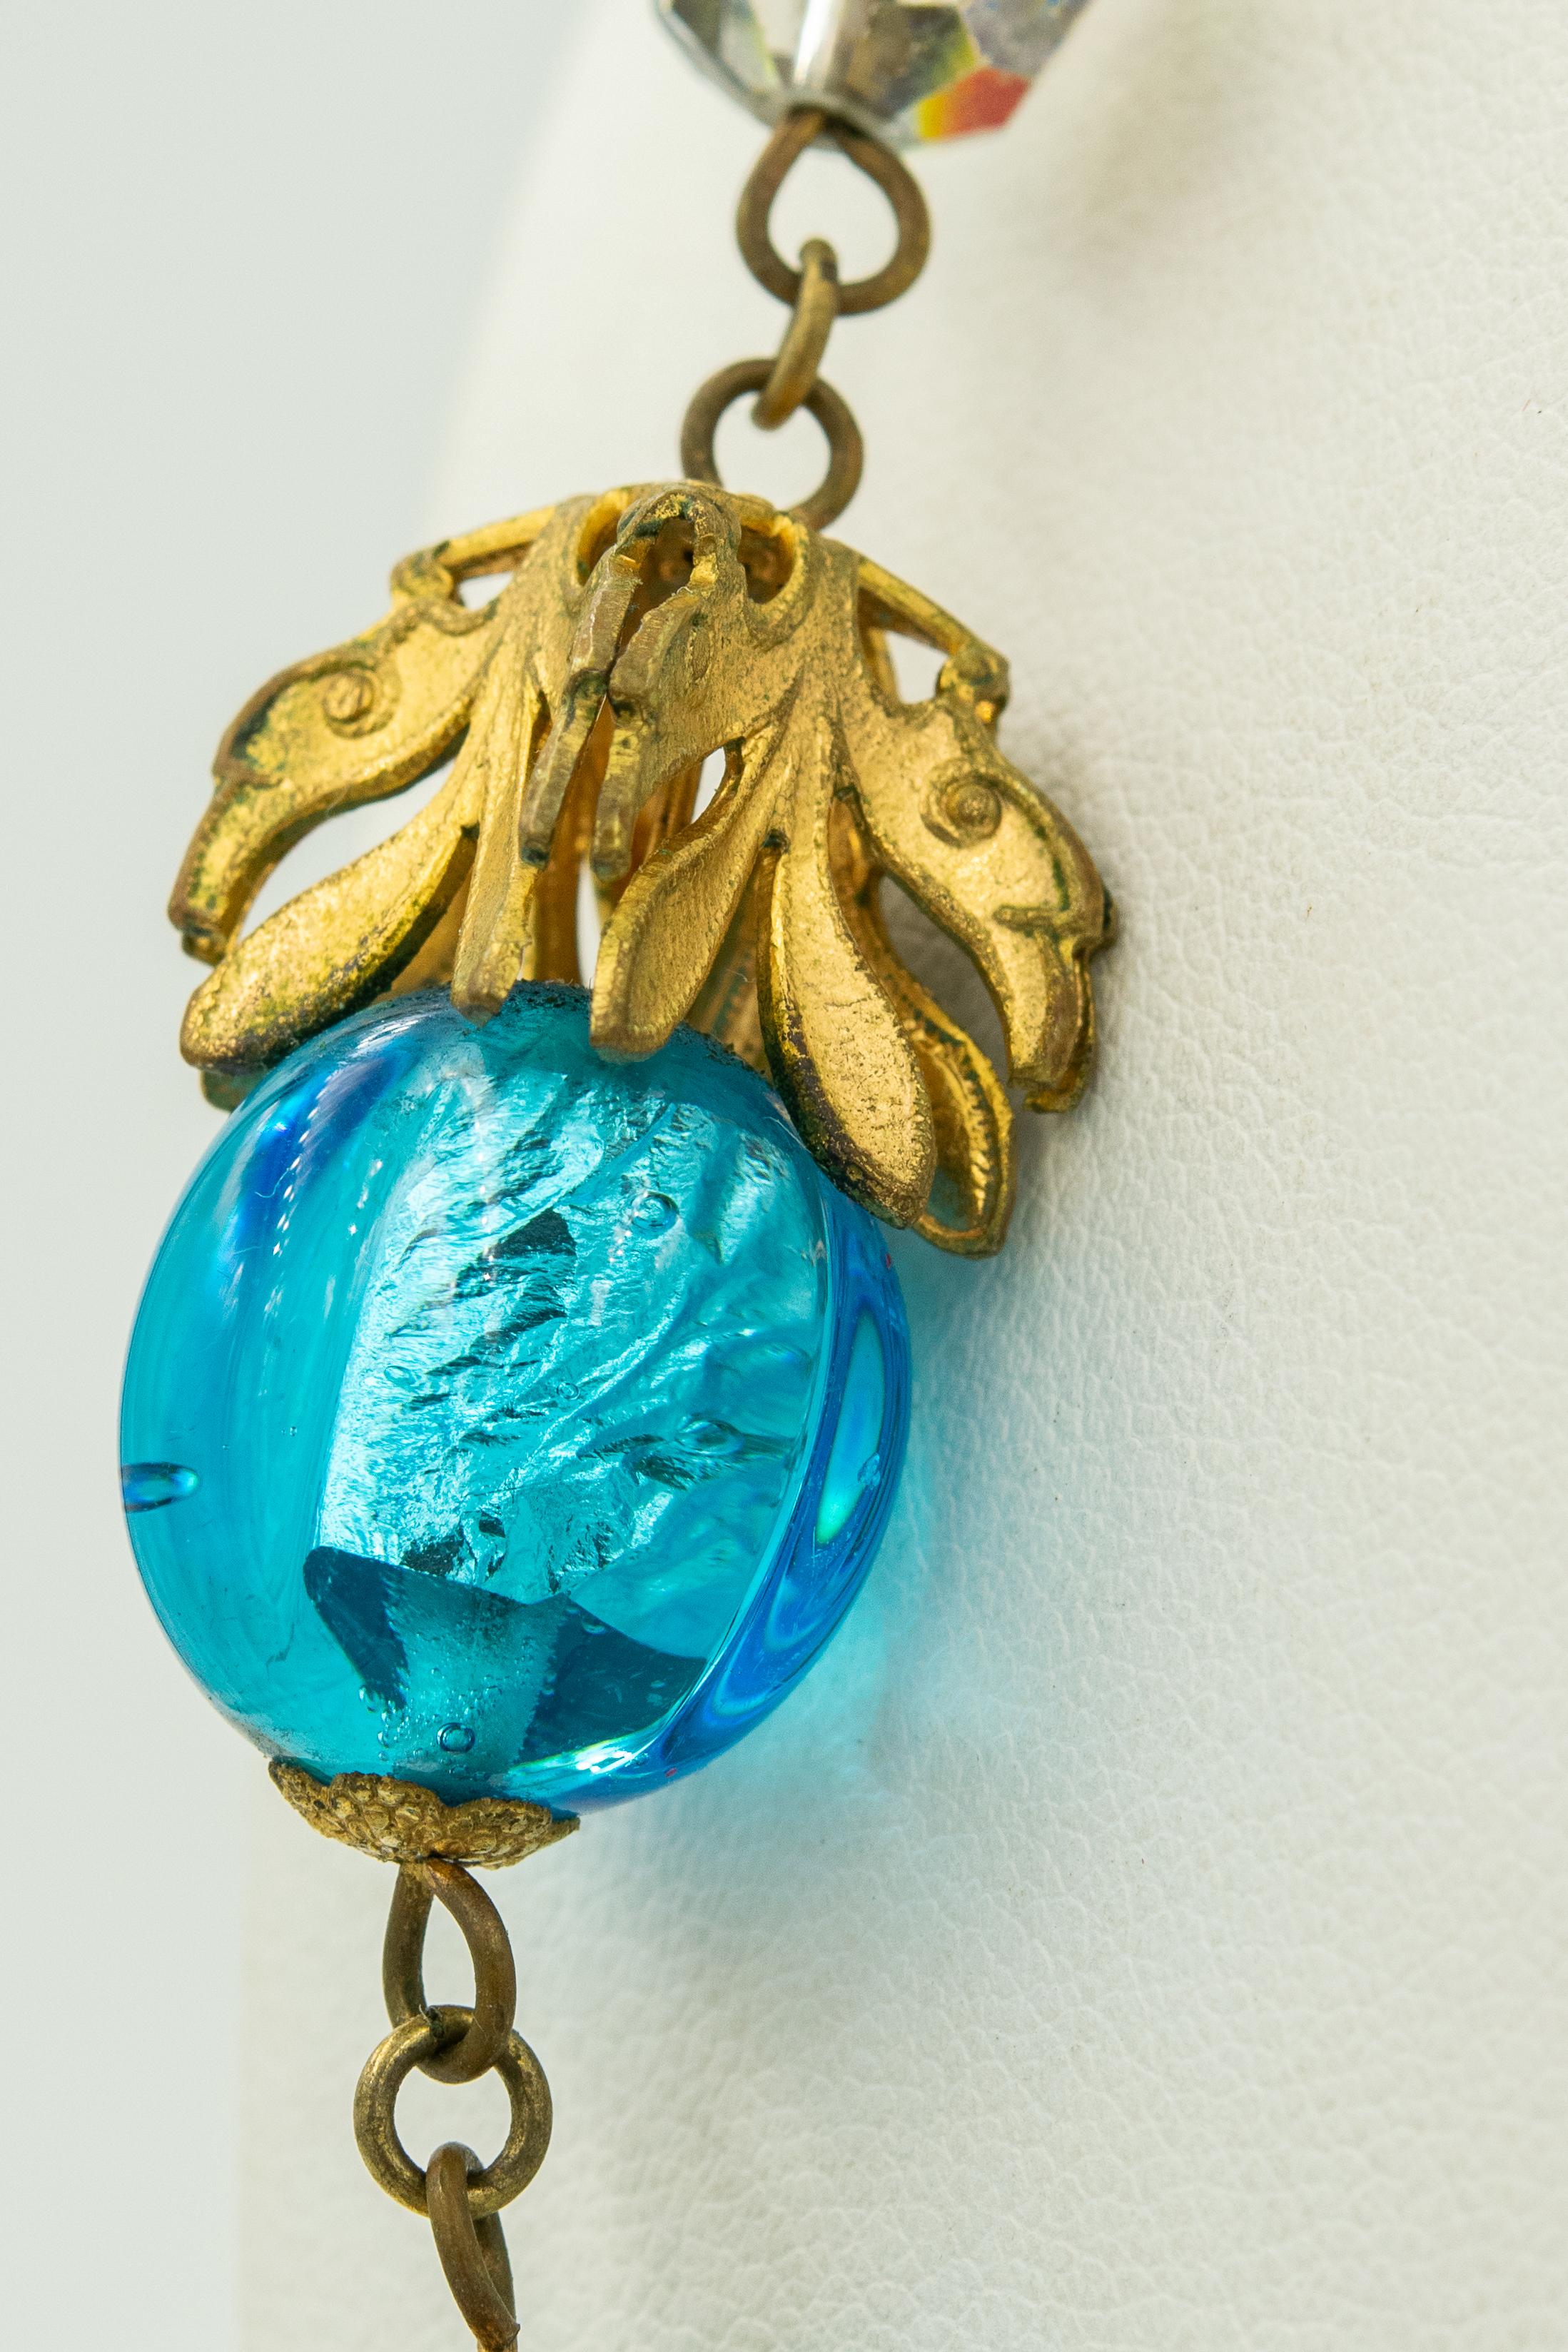 This necklace is gorgeous.  I love the foil within the blue glass bead gives the piece such dimension and life.  The draping gilt leafs makes you fee like you are in a secret garden or perhaps under water.  Accented among the larger beads are 5